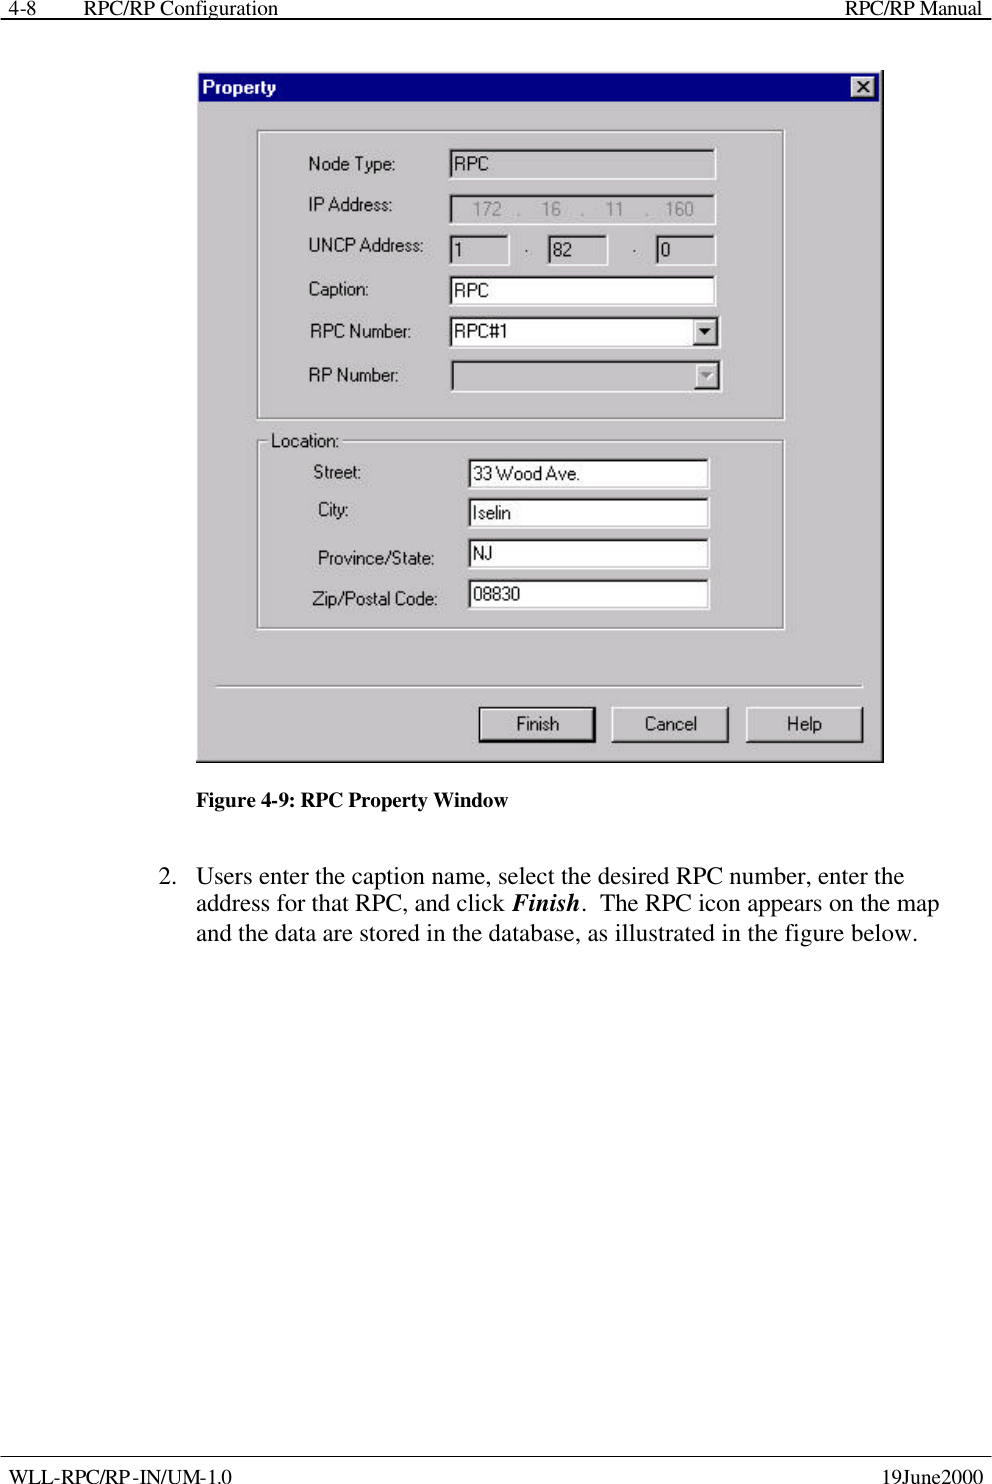  RPC/RP Configuration    RPC/RP Manual   WLL-RPC/RP-IN/UM-1.0    19June2000 4-8 Figure 4-9: RPC Property Window 2.  Users enter the caption name, select the desired RPC number, enter the address for that RPC, and click Finish.  The RPC icon appears on the map and the data are stored in the database, as illustrated in the figure below. 